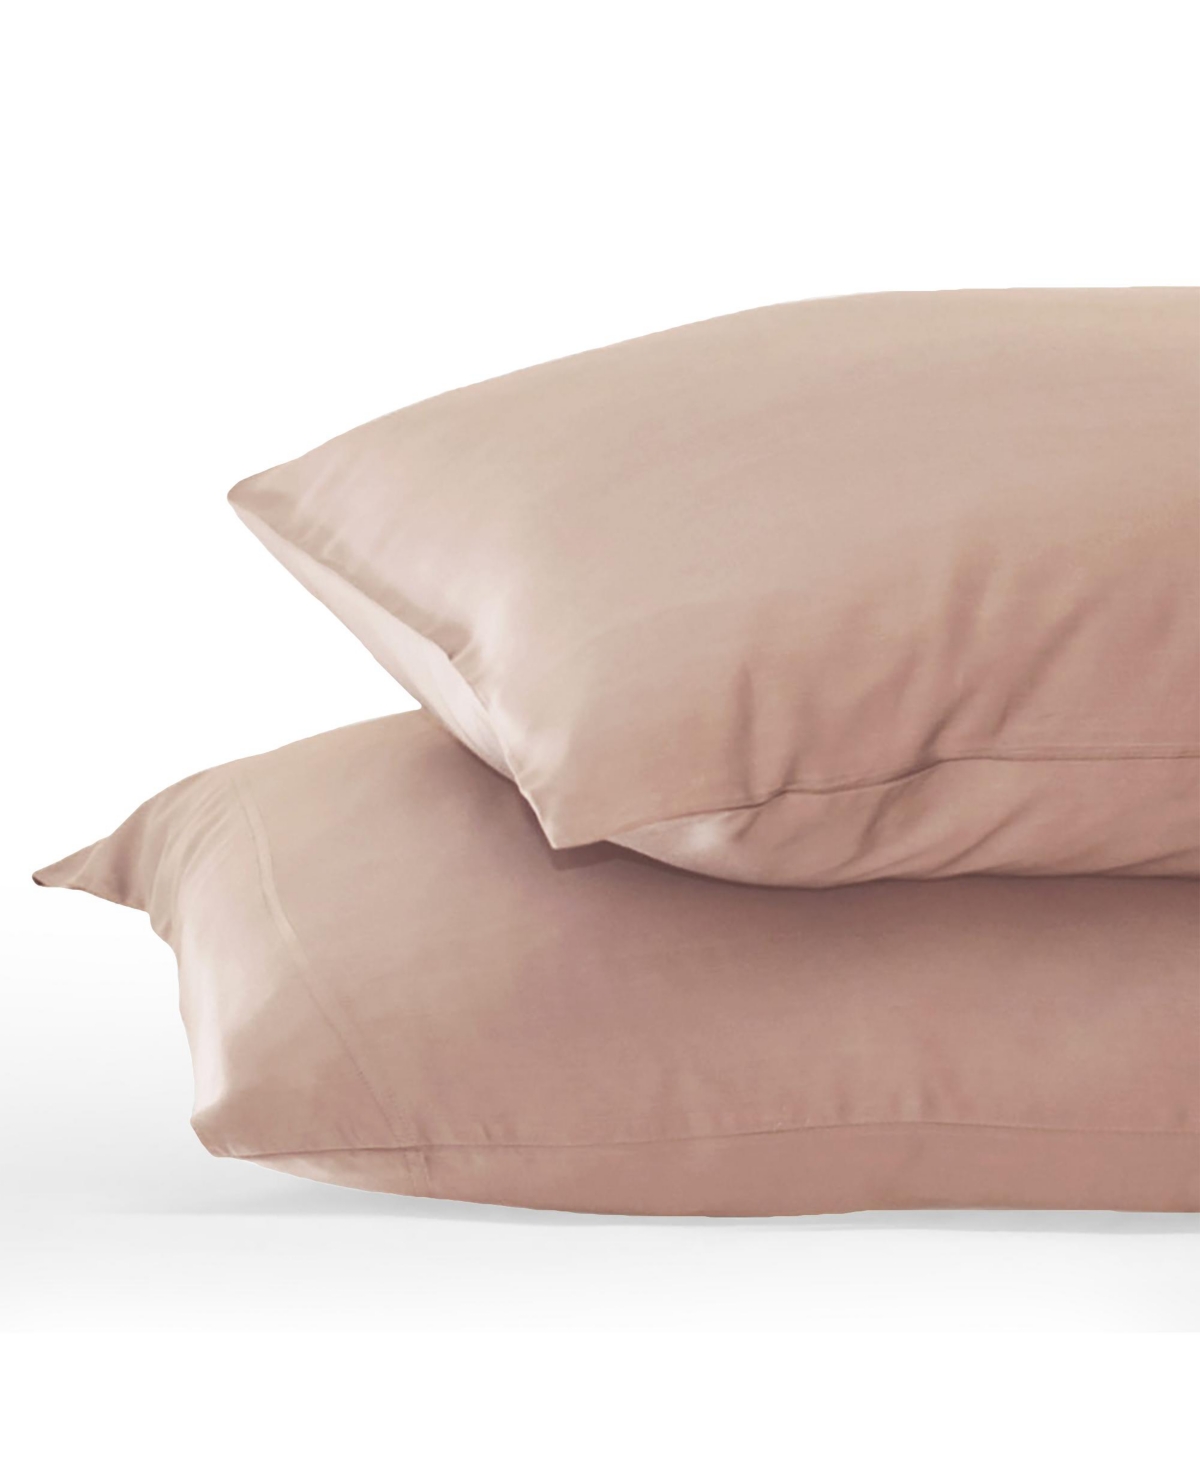 Cariloha Resort 400 Thread Count Viscose From Bamboo Set Of 2 Pillowcases, Standard In Blush